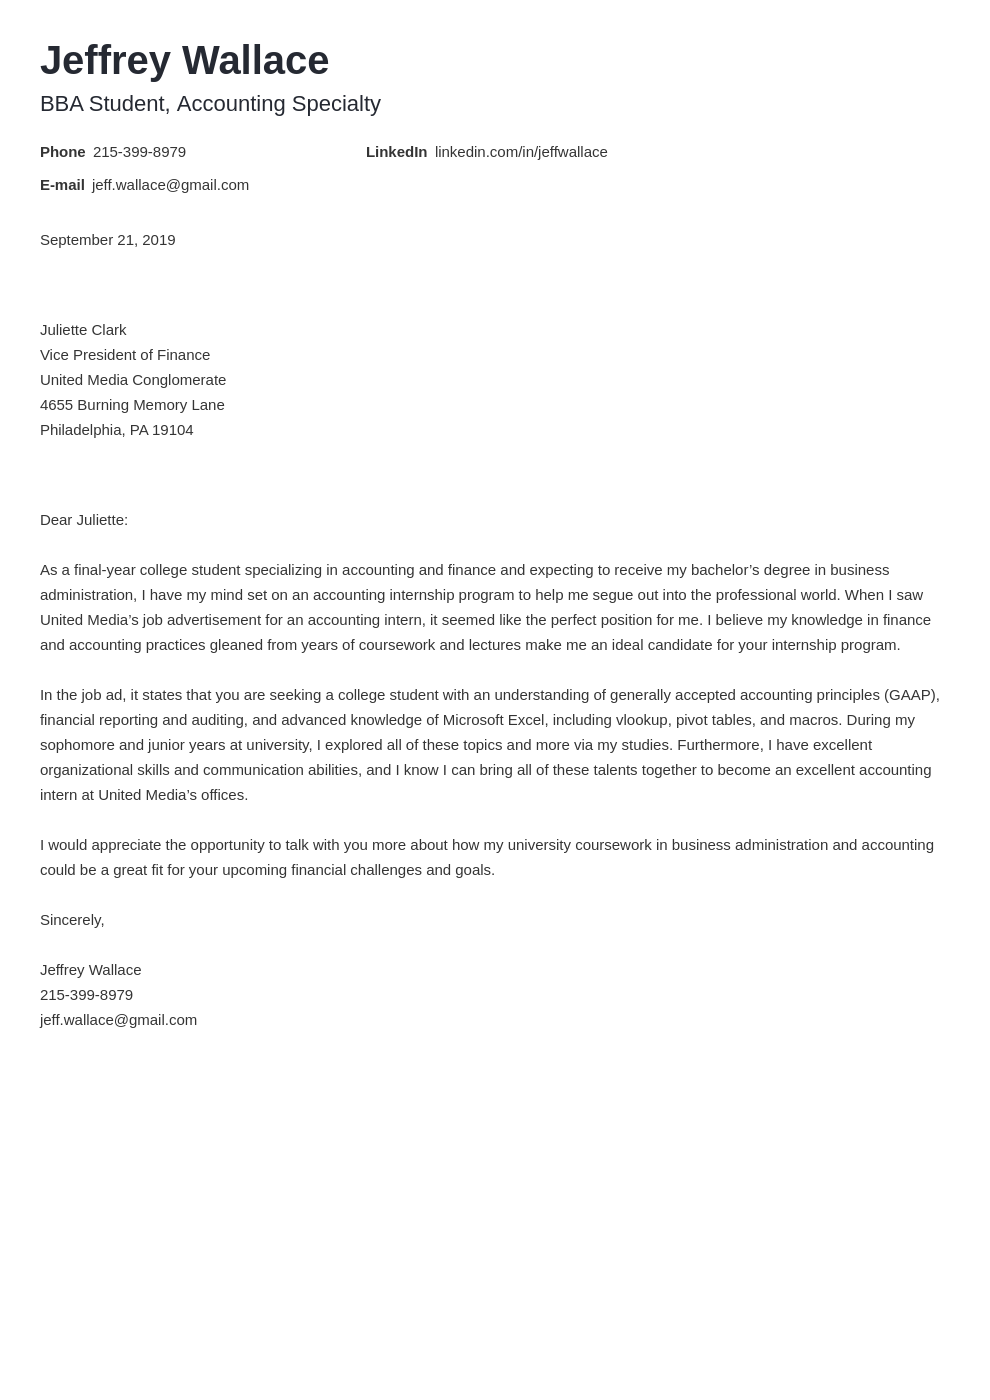 Accounting Cover Letter: Sample & Ready-To-Use Templates